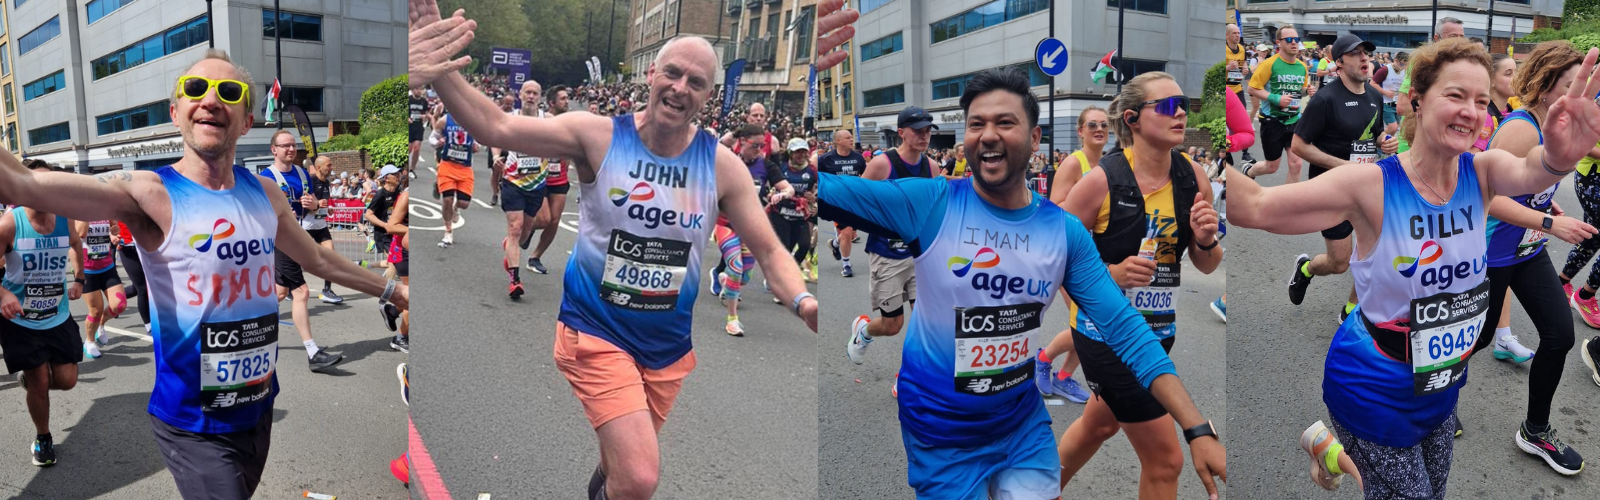 A collage of London Marathon runners